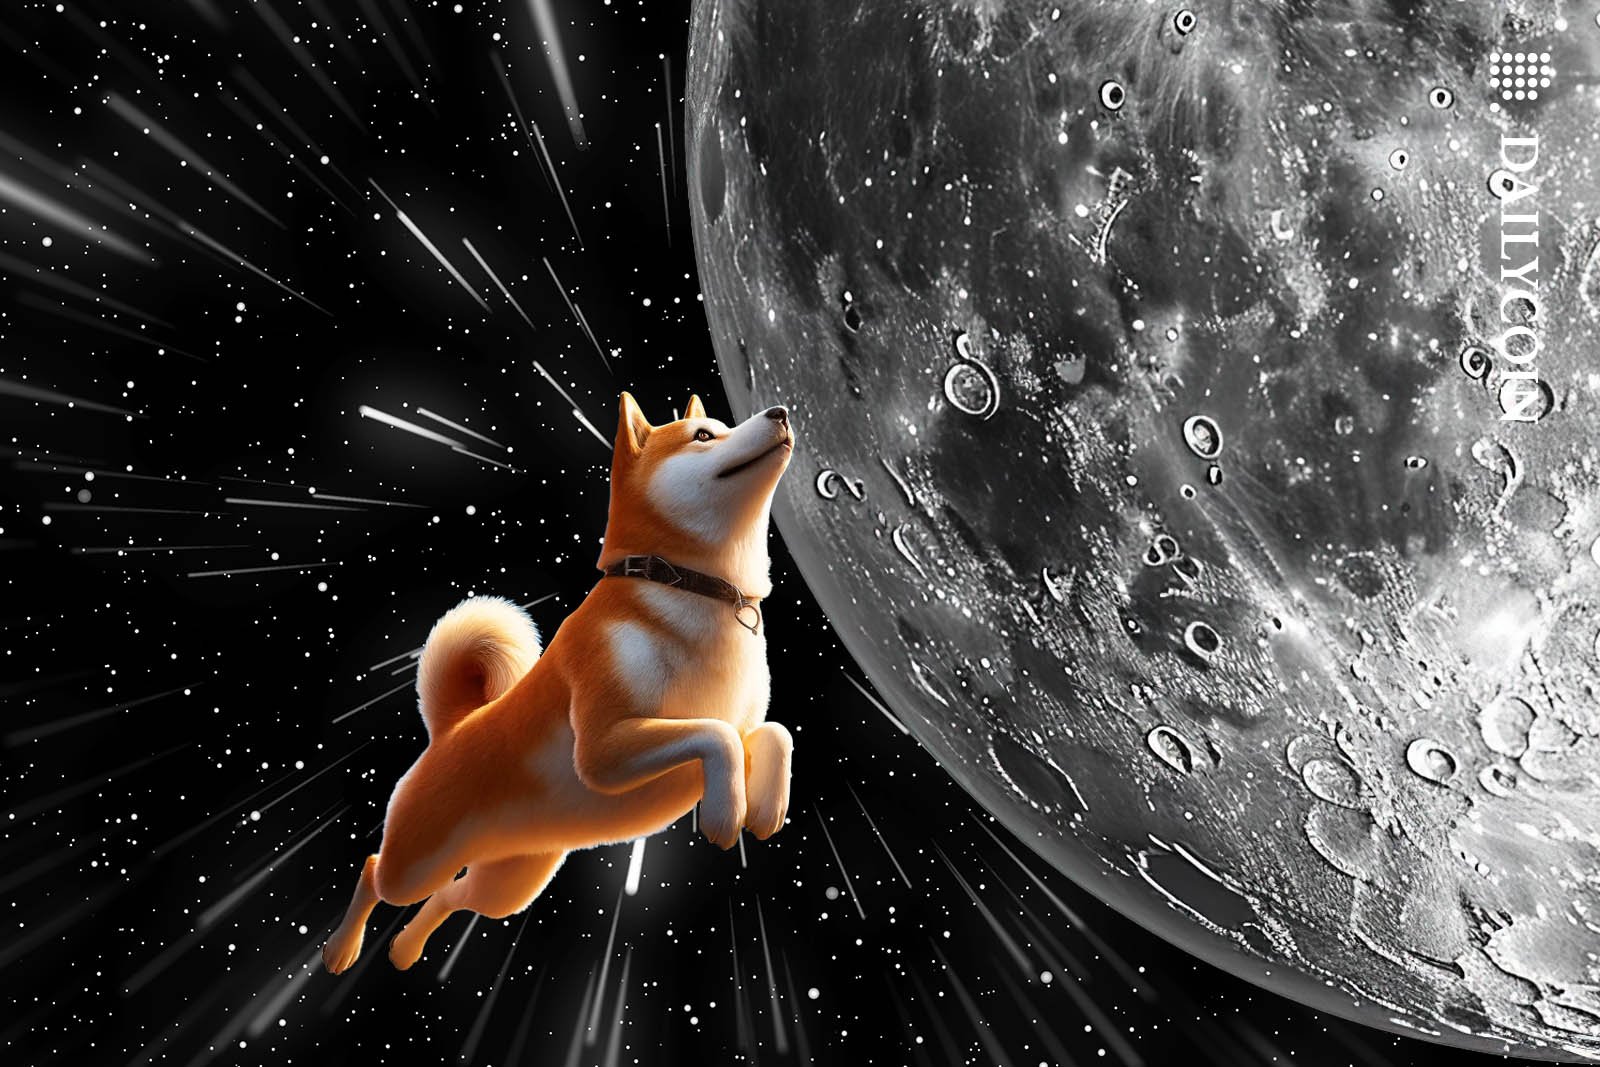 Dogecoin dog flying in space towards the moon.